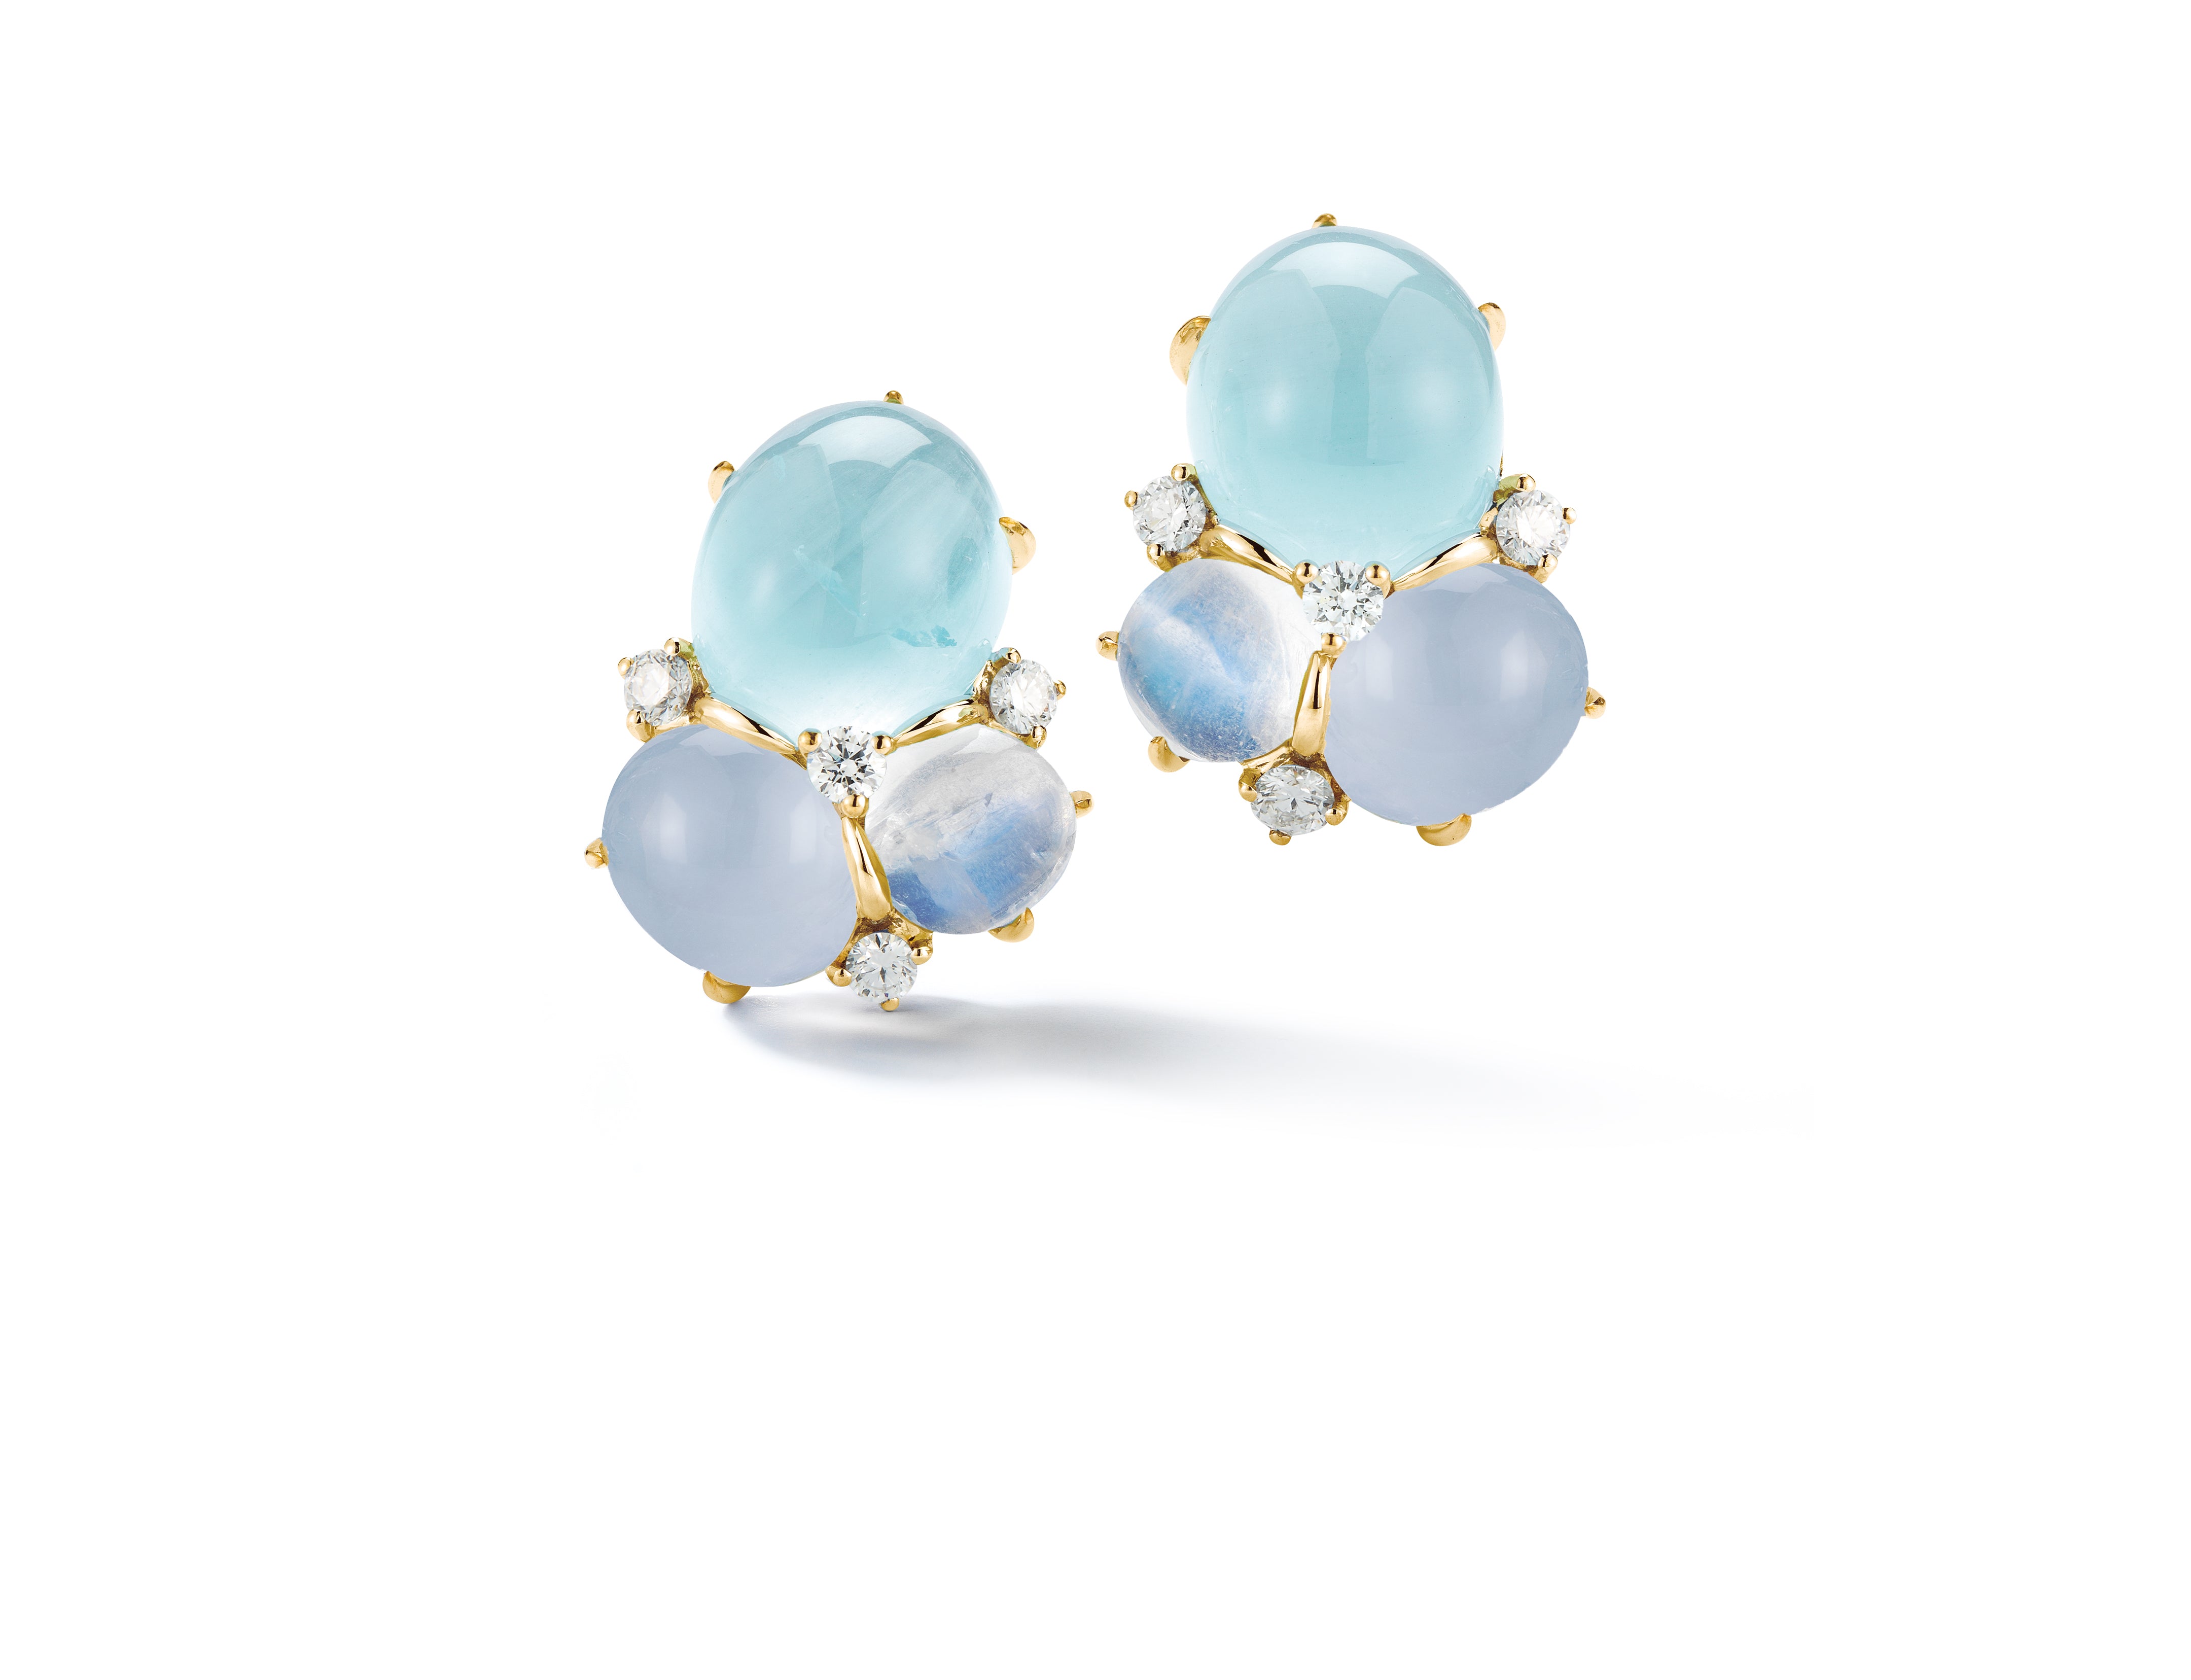 Three Cab Earrings in Blues & Yellow Gold